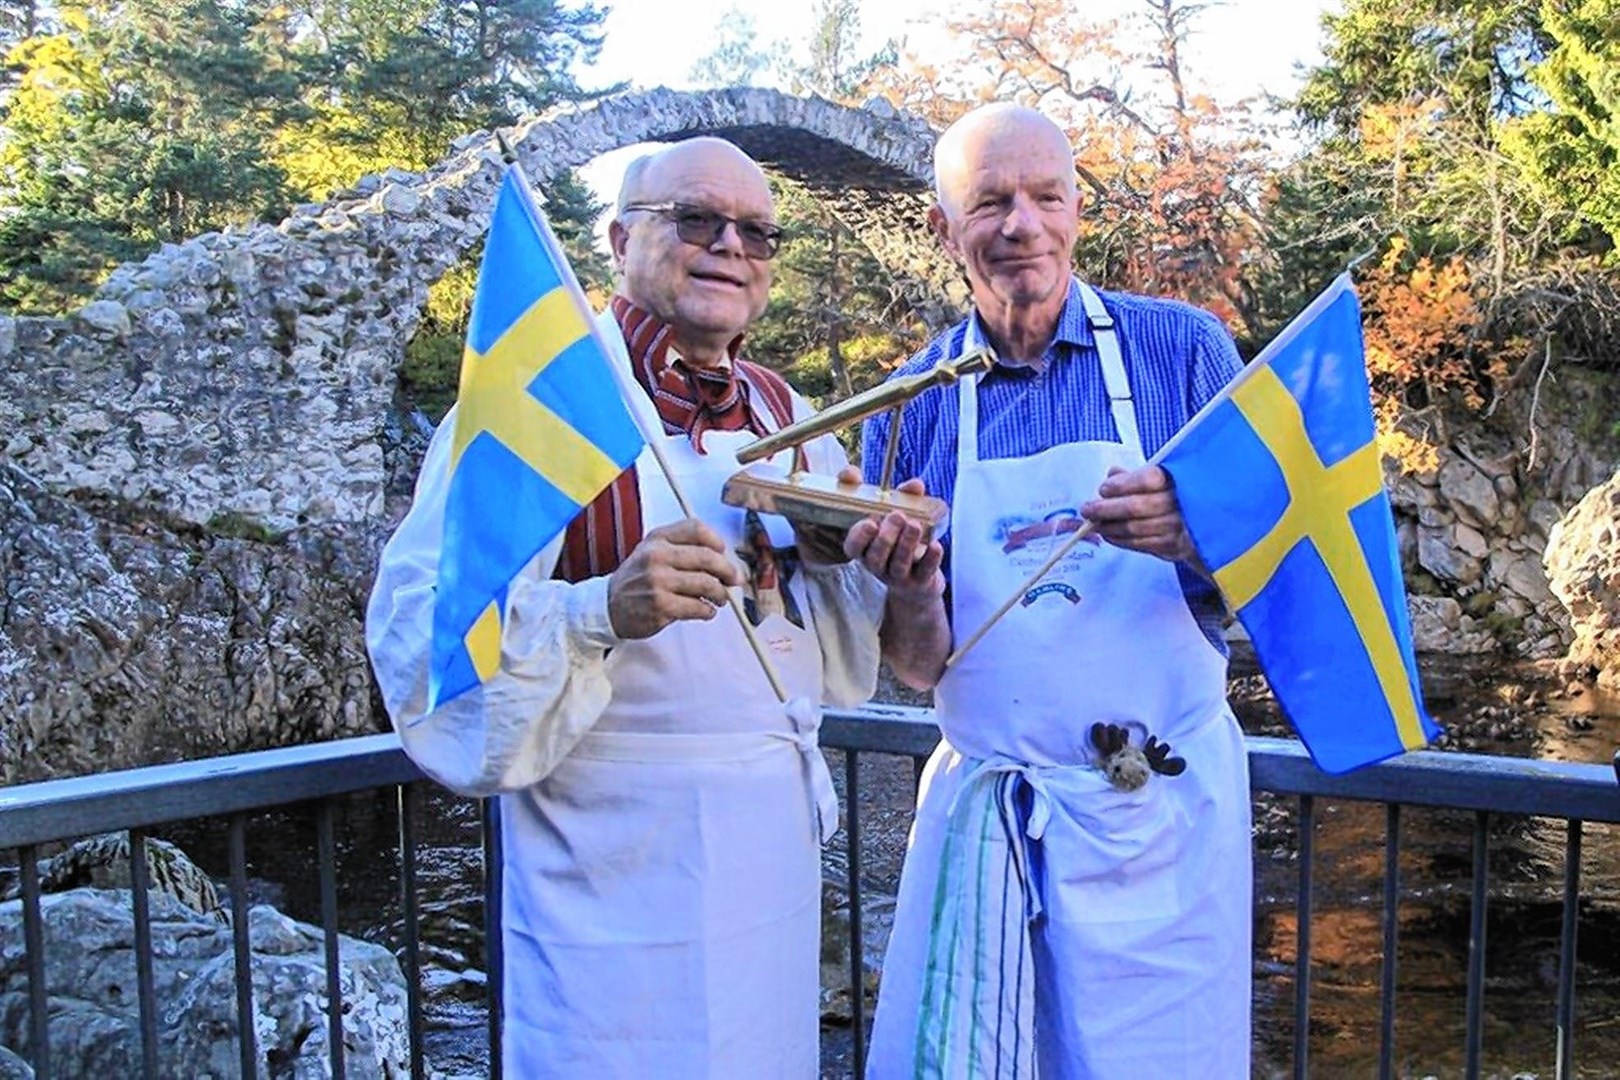 Past winners of the World Porridge Making Championships in Carrbridge have come from all over the world.